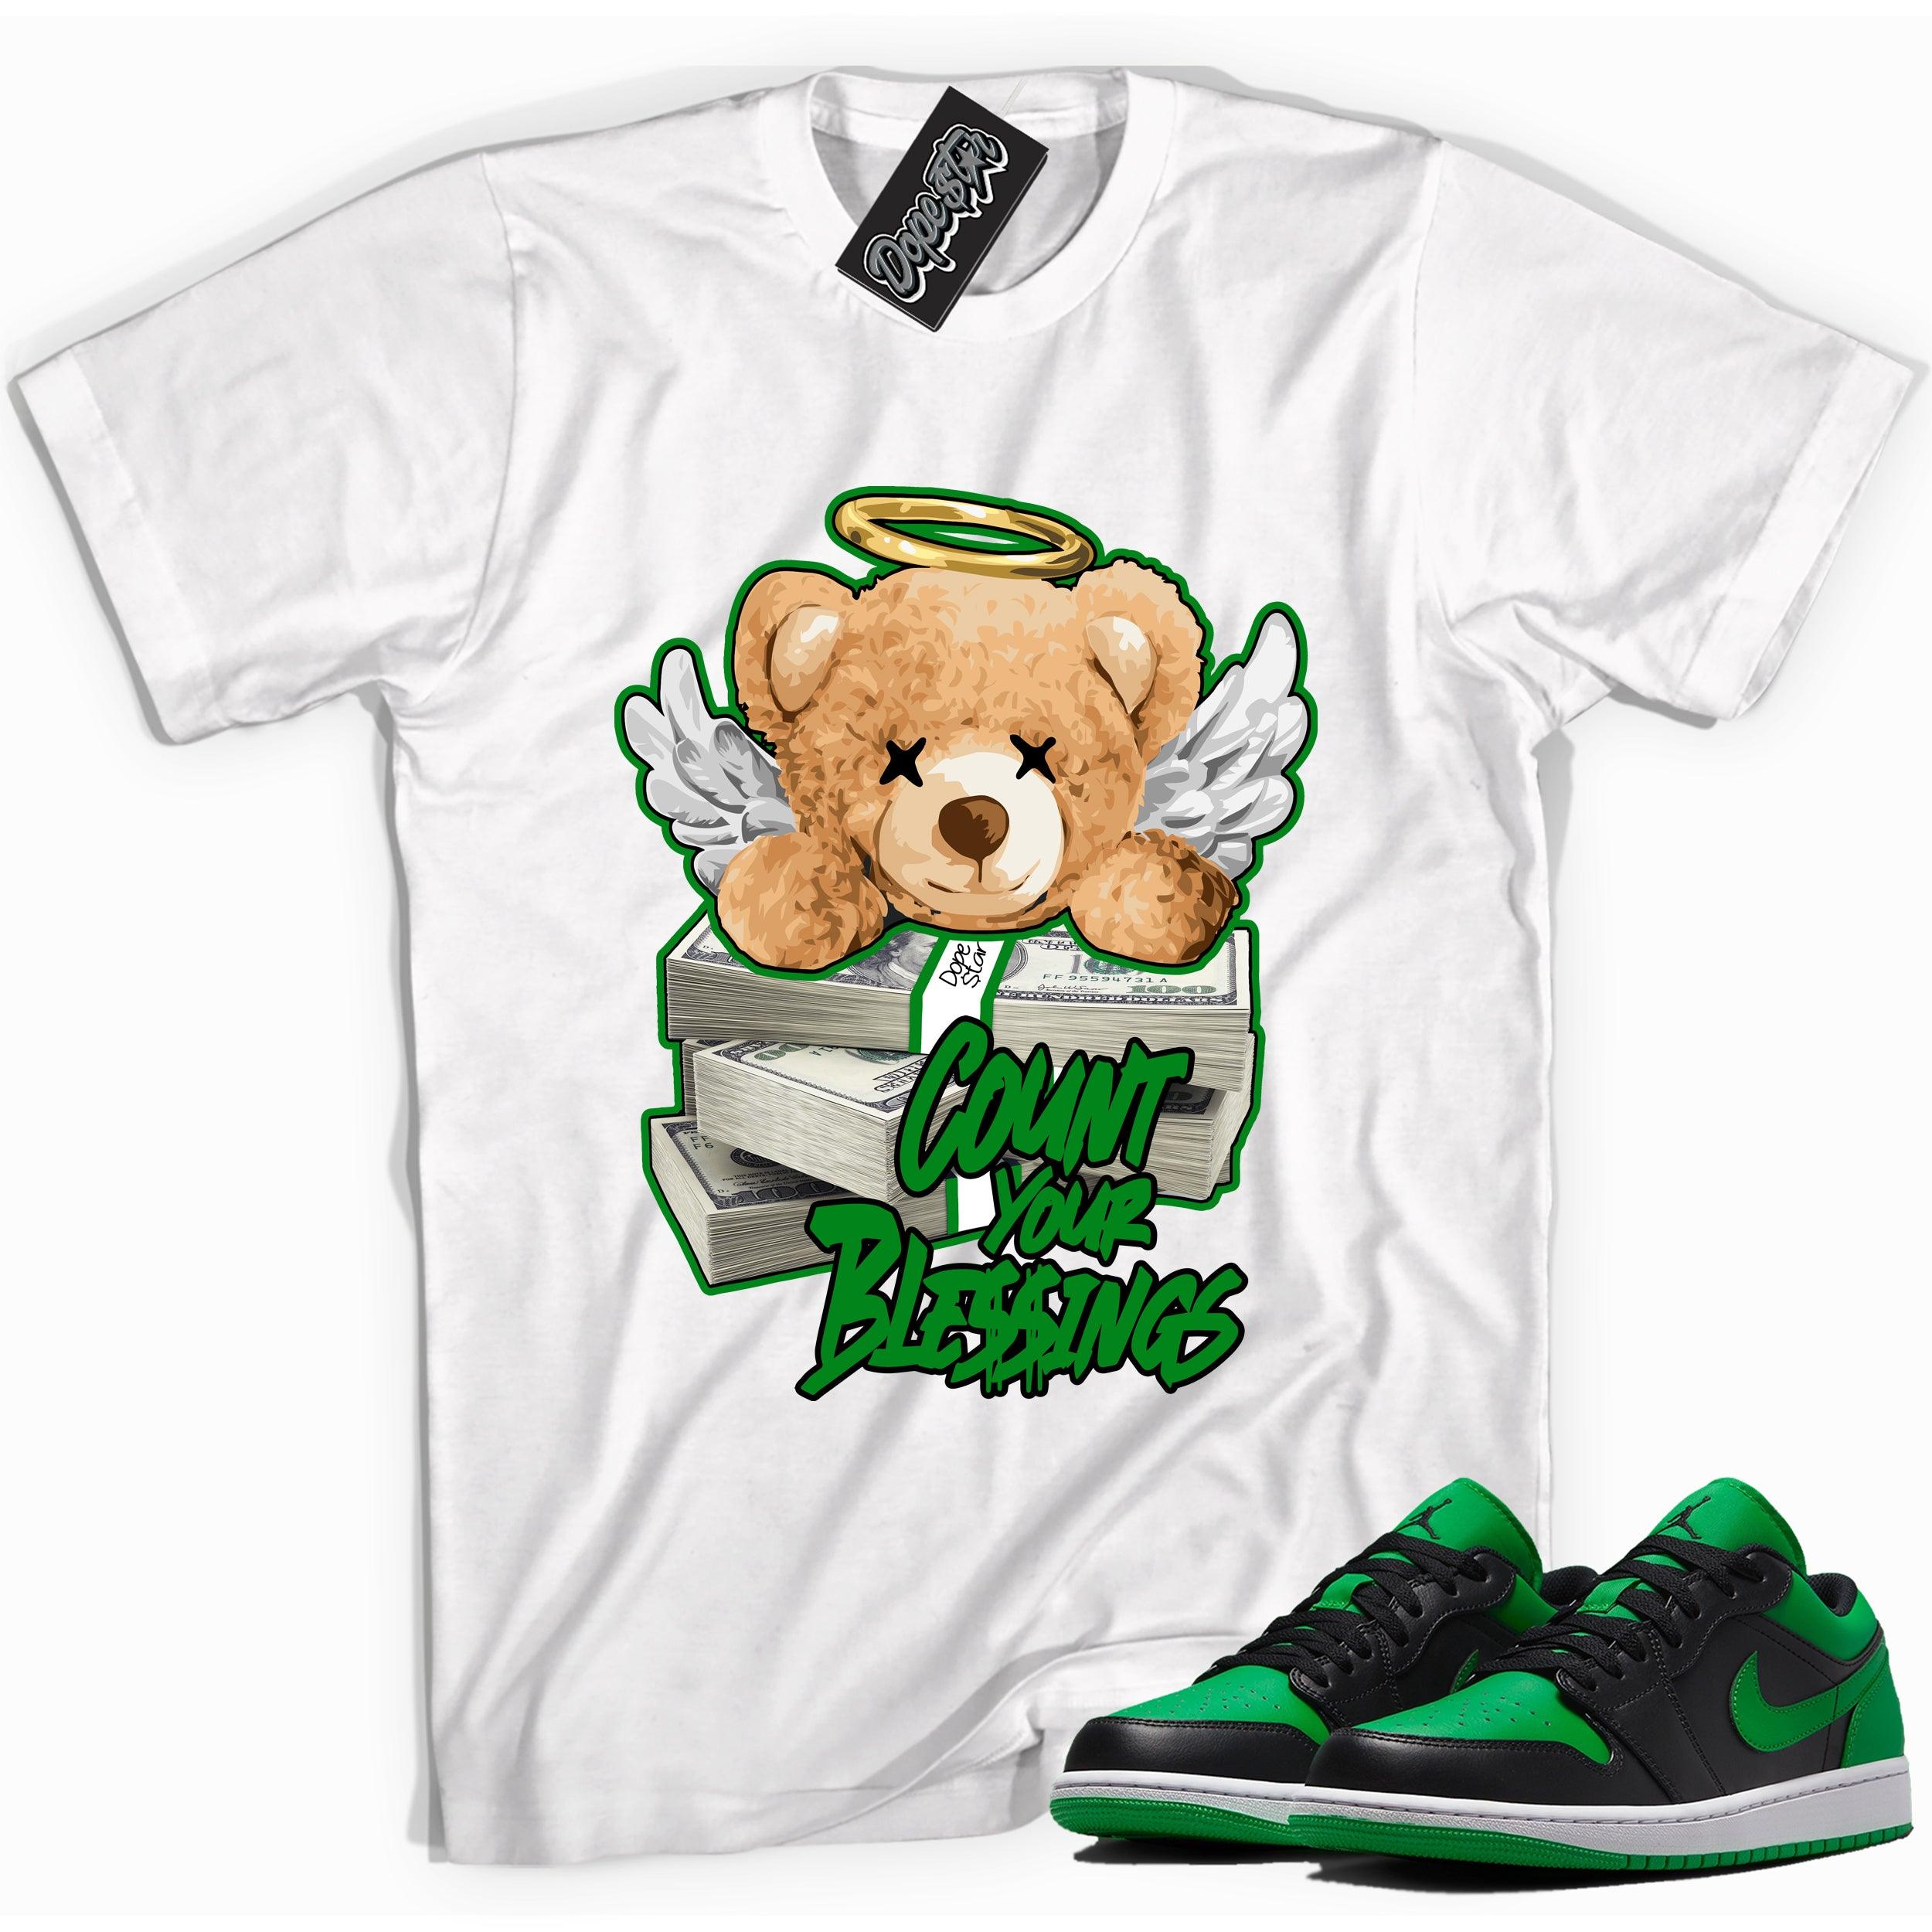 Cool white graphic tee with 'Count Your Blessings' print, that perfectly matches Air Jordan 1 Low Lucky Green sneakers